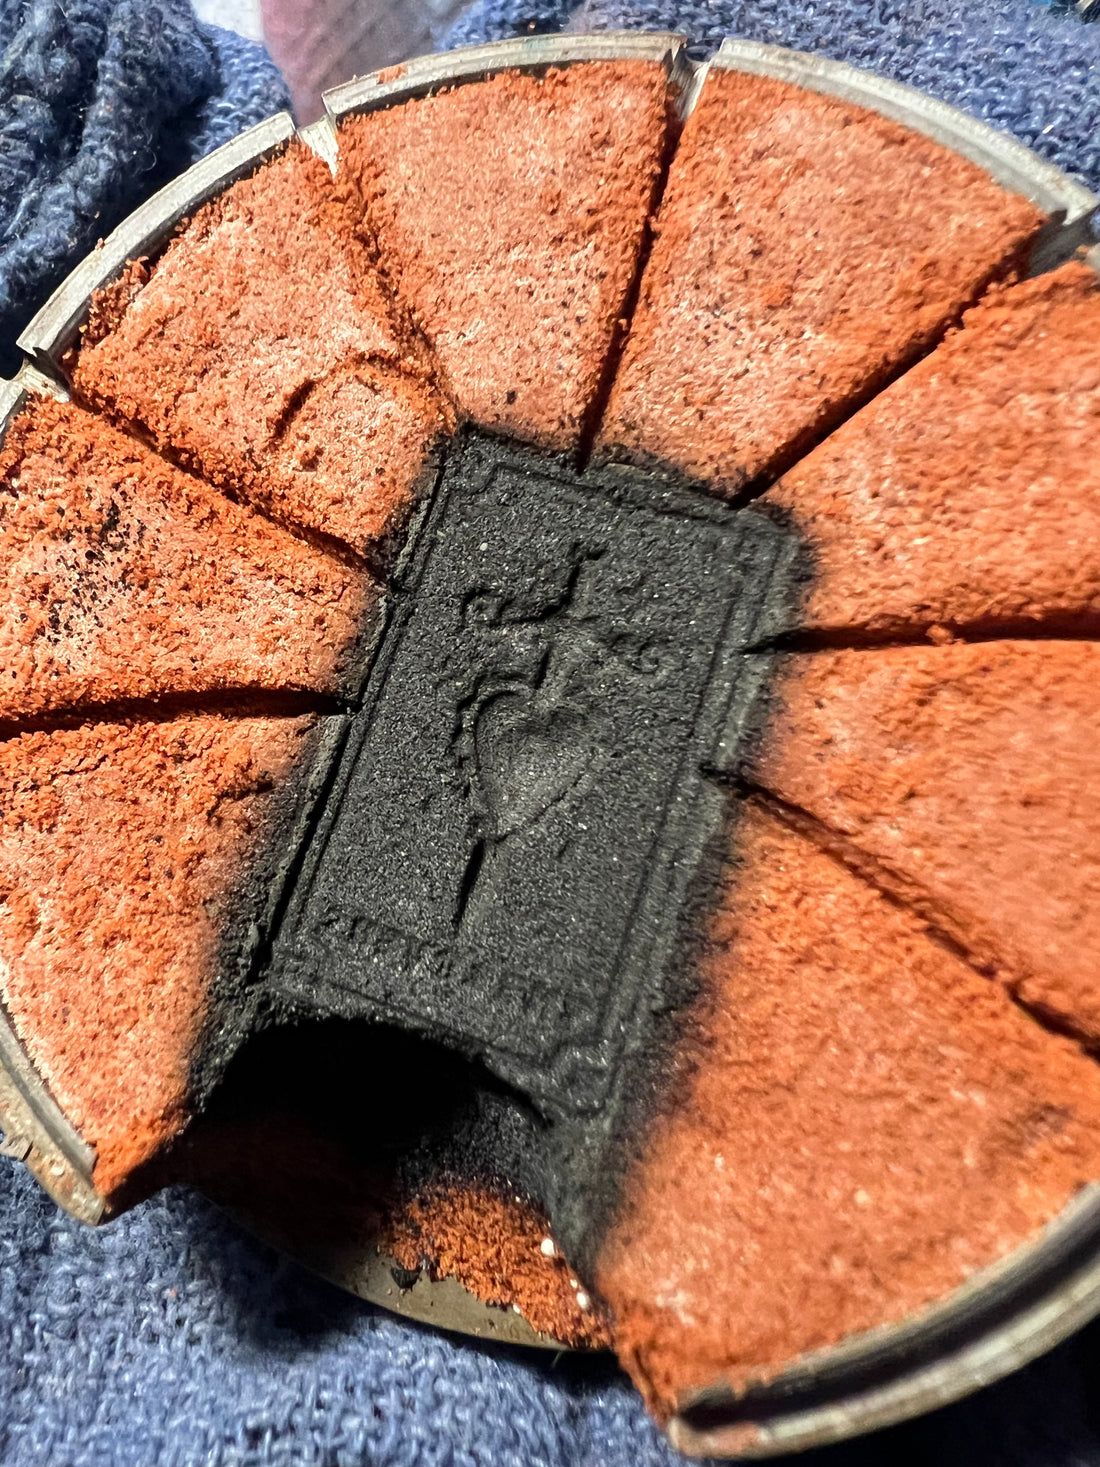 Sand Casting a Sterling Silver Tarot Card Pendant